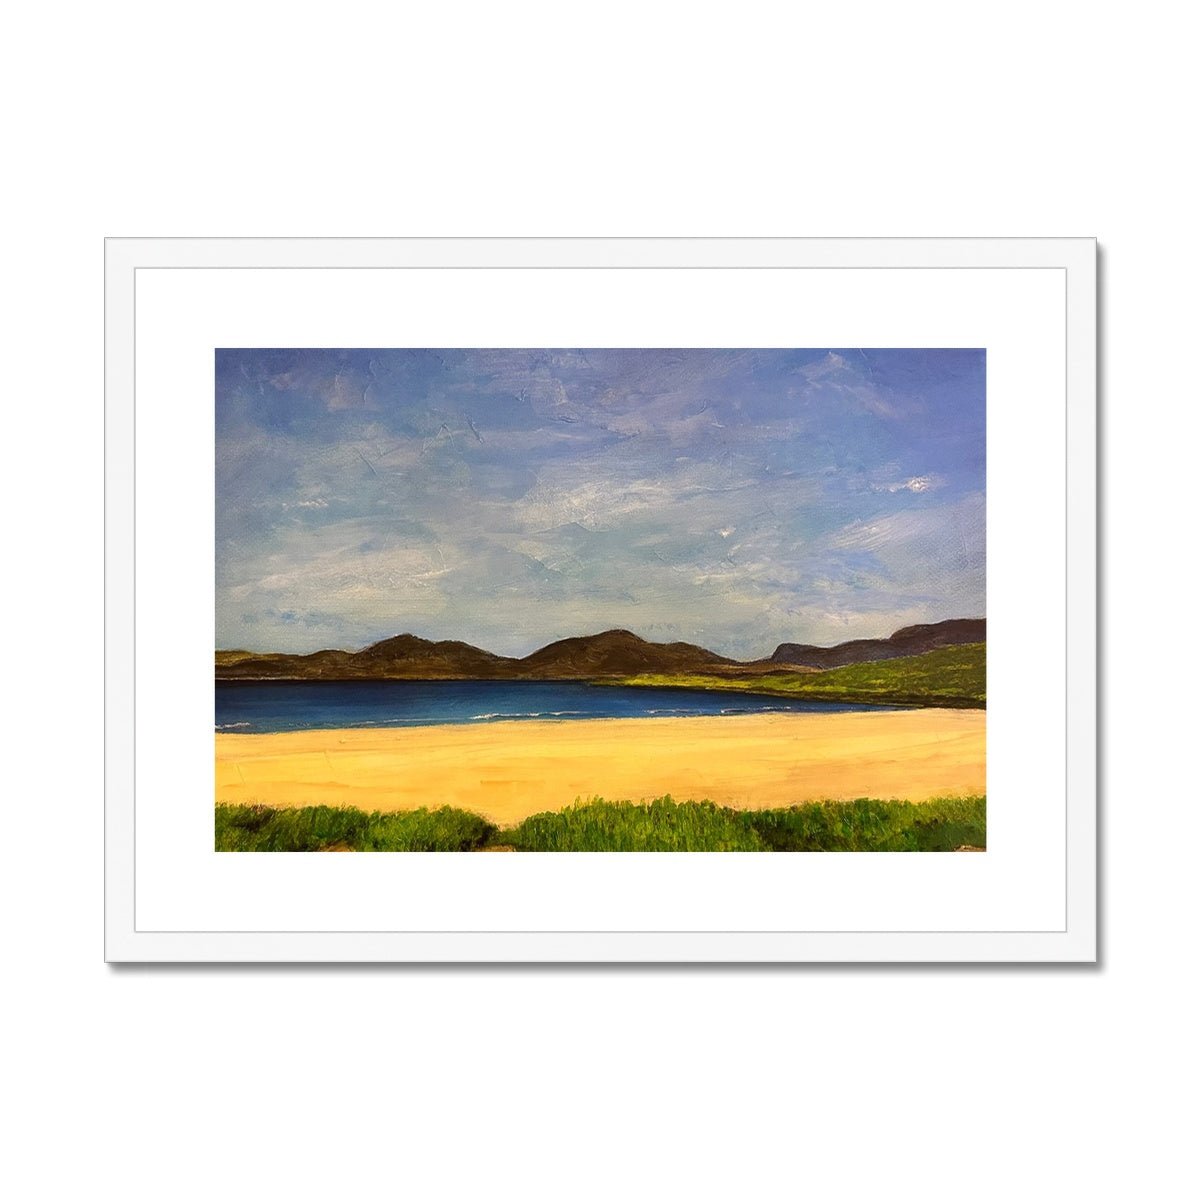 Luskentyre Beach Harris Painting | Framed & Mounted Prints From Scotland-Framed & Mounted Prints-Hebridean Islands Art Gallery-A2 Landscape-White Frame-Paintings, Prints, Homeware, Art Gifts From Scotland By Scottish Artist Kevin Hunter